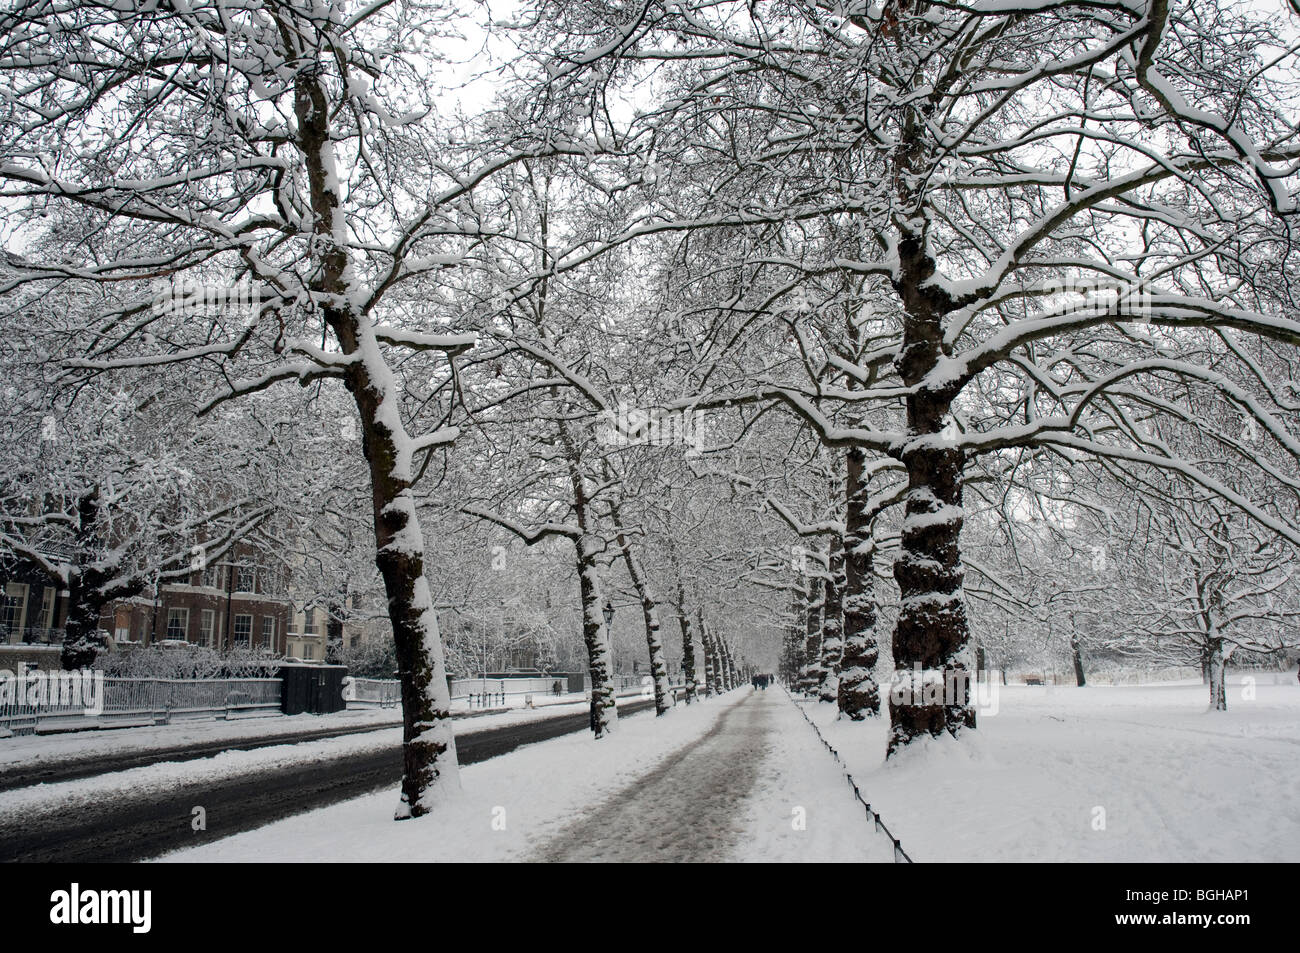 Birdcage Walk in St James Park in Central London in the snow Stock Photo